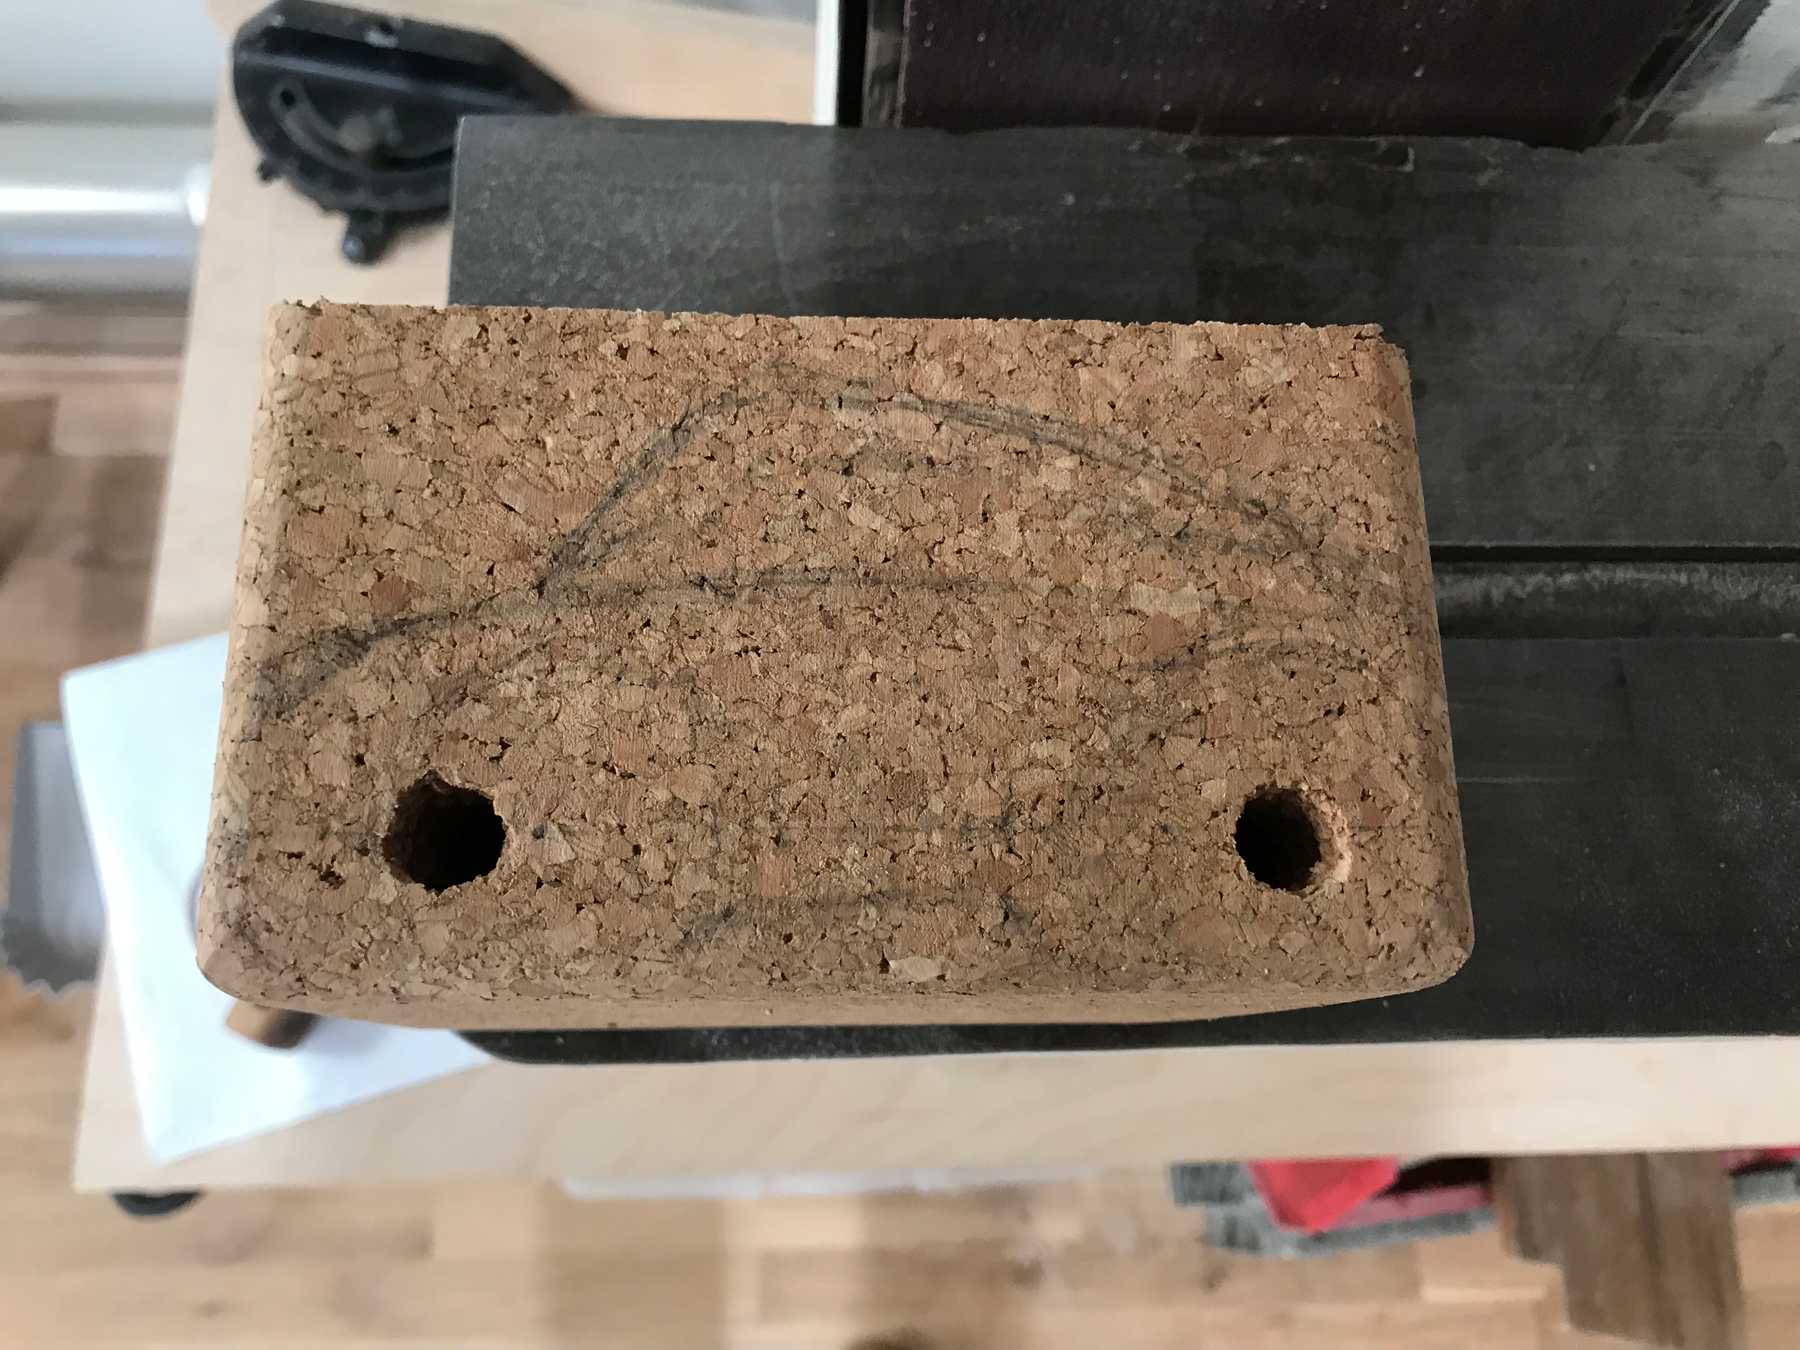 The block cut to size